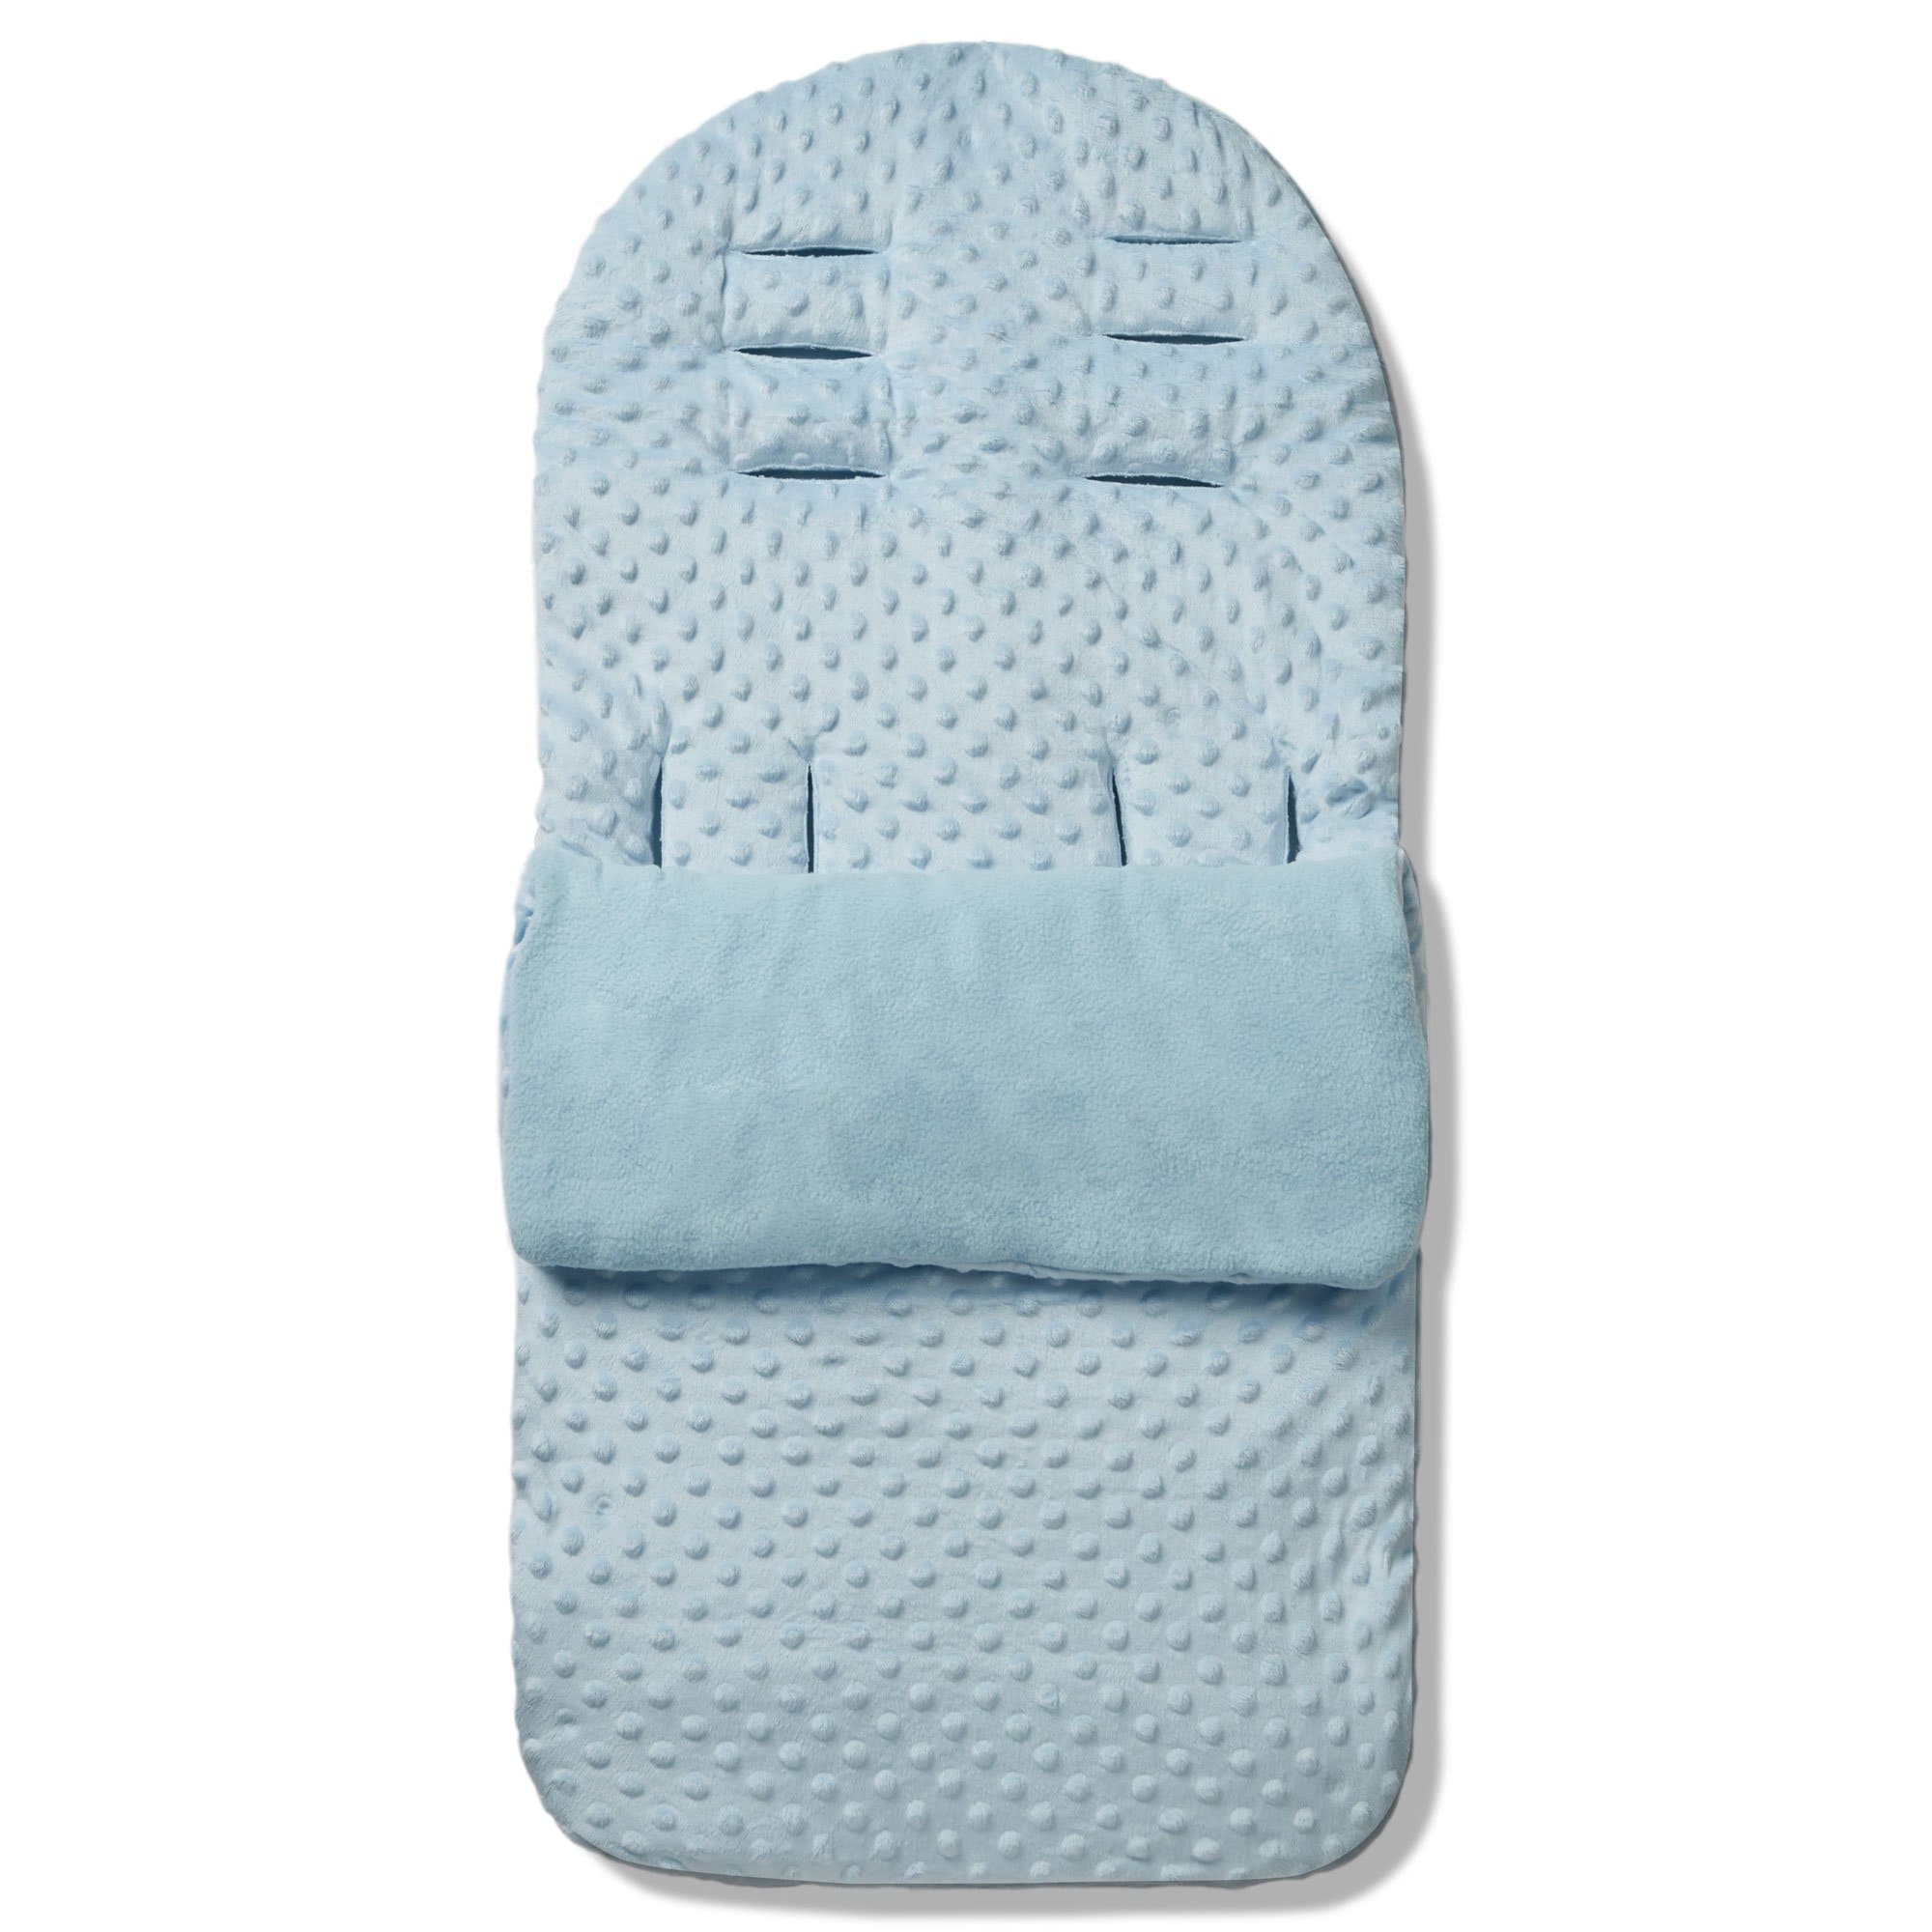 Dimple Footmuff / Cosy Toes Compatible with DoBuggy - Blue / Fits All Models | For Your Little One